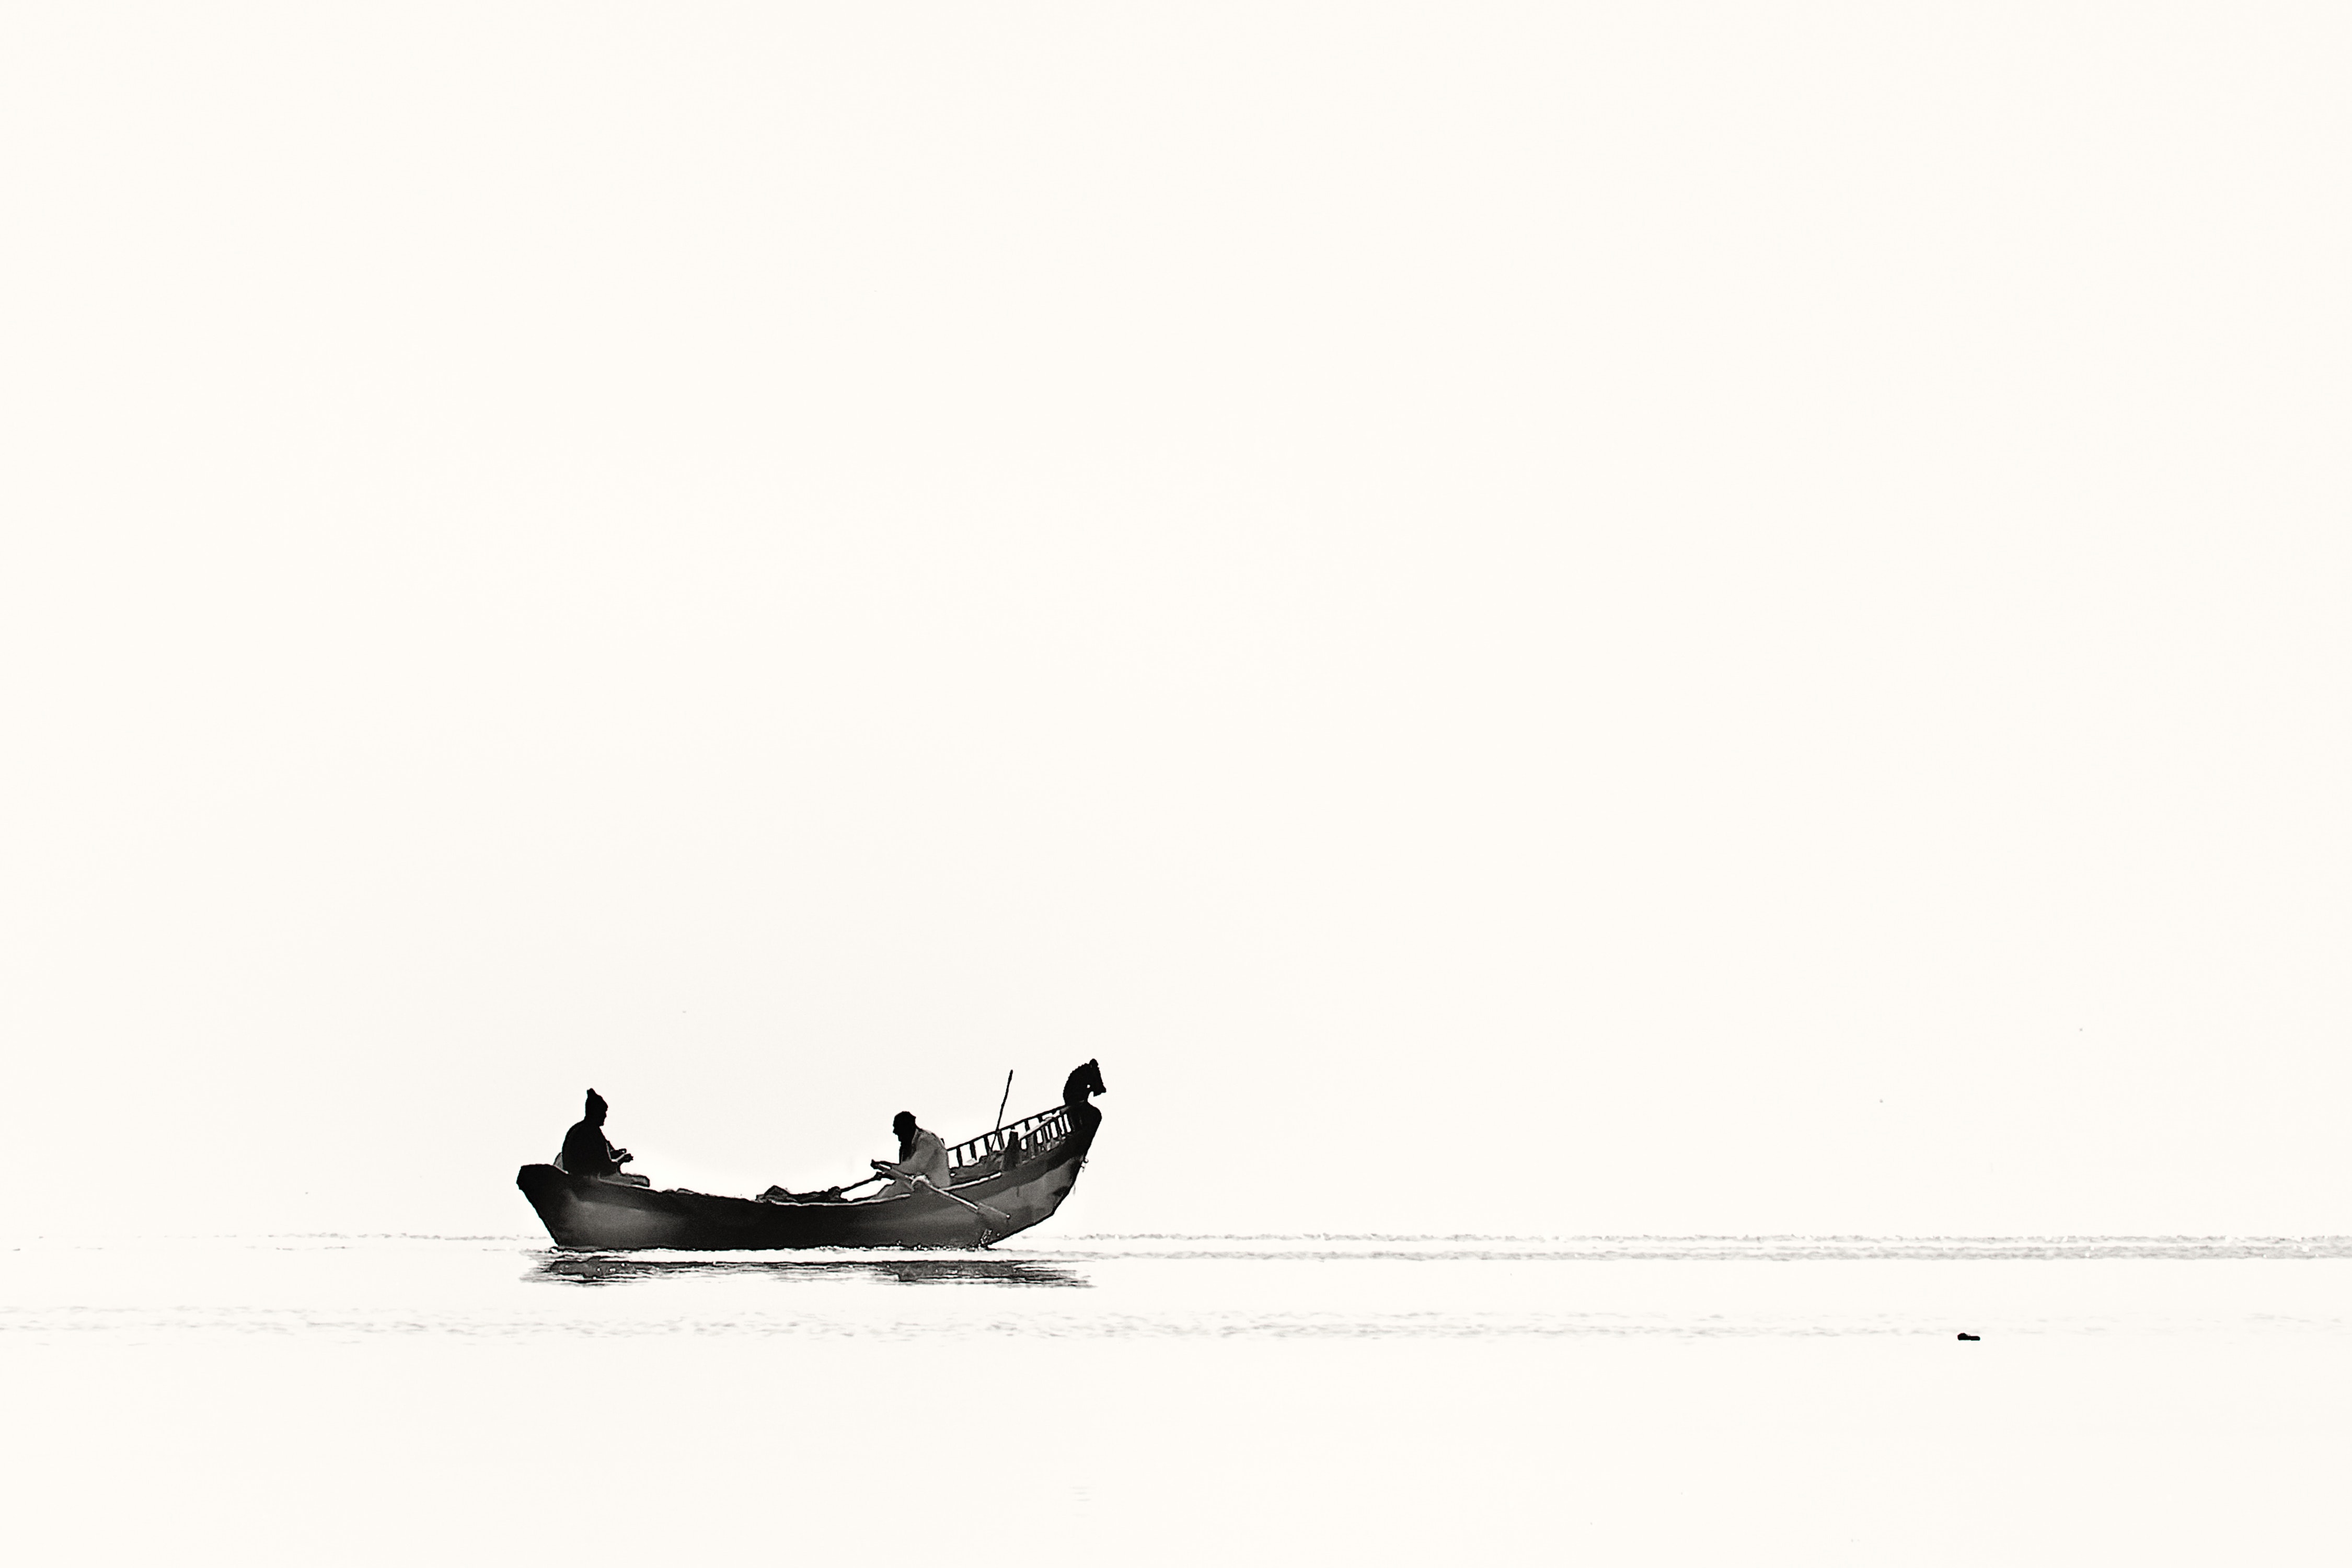 Two person riding boat on body of water photo